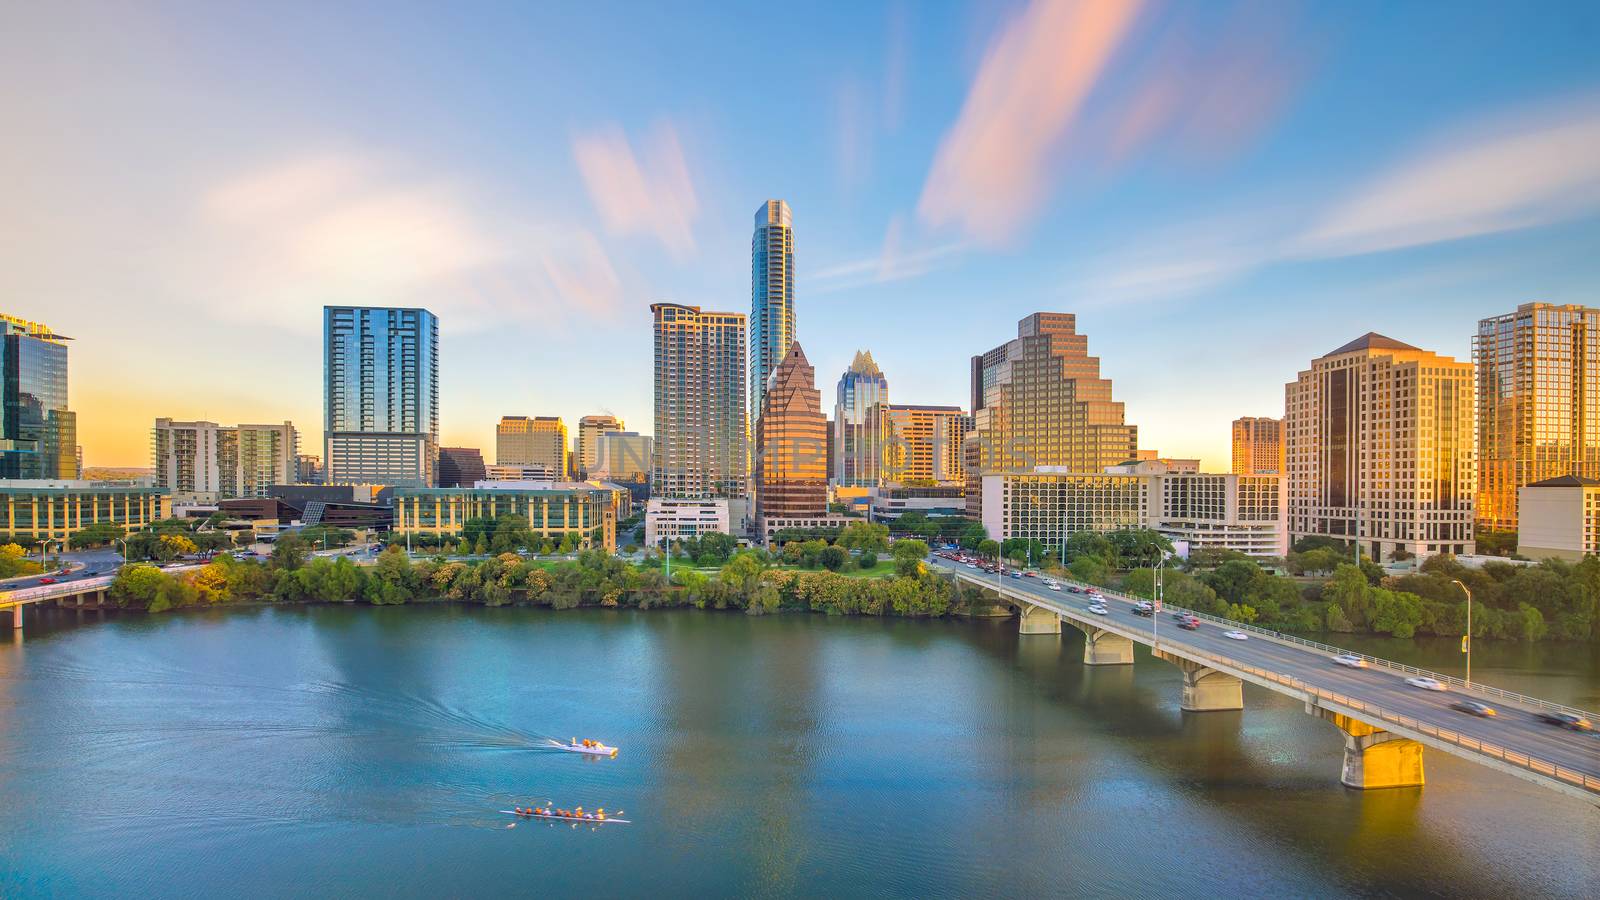 Downtown Skyline of Austin, Texas in USA from top view by f11photo